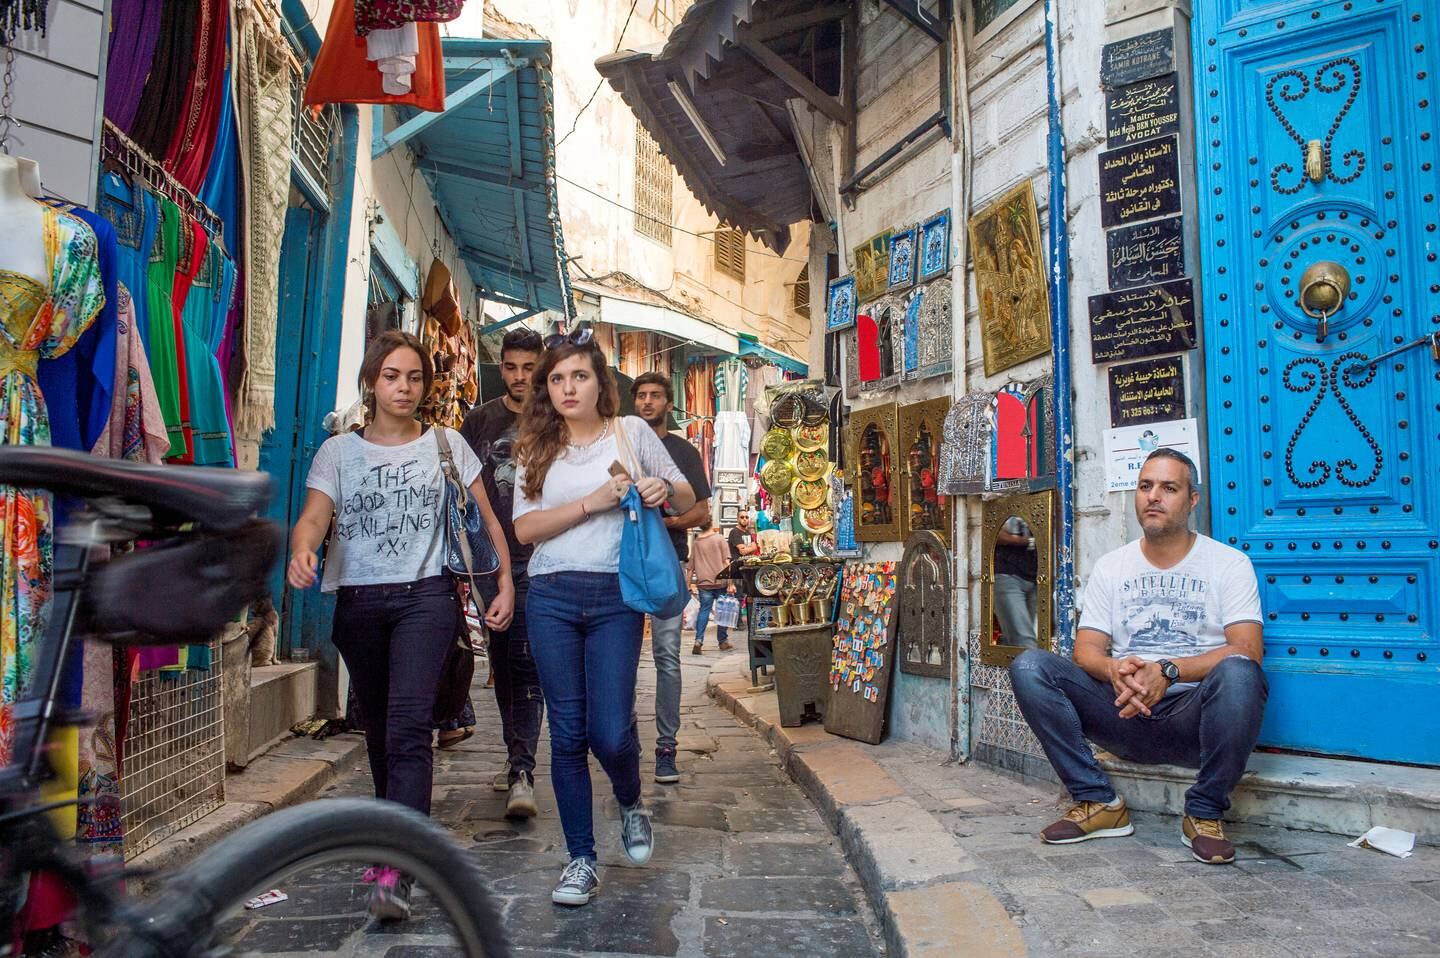 TUNIS, TUNISIA - OCTOBER 4: Shoppers pass through the narrow alleys in the souks of the Medina on October 4, 2016 in Tunis, Tunisia. The Medina, a quarter of Tunis housing souks, mausoleums, monuments and cafes, is built around the Zitouna Mosque and became a UNESCO World Heritage Site in 1979. (Photo by Ann Hermes/The Christian Science Monitor via Getty Images)